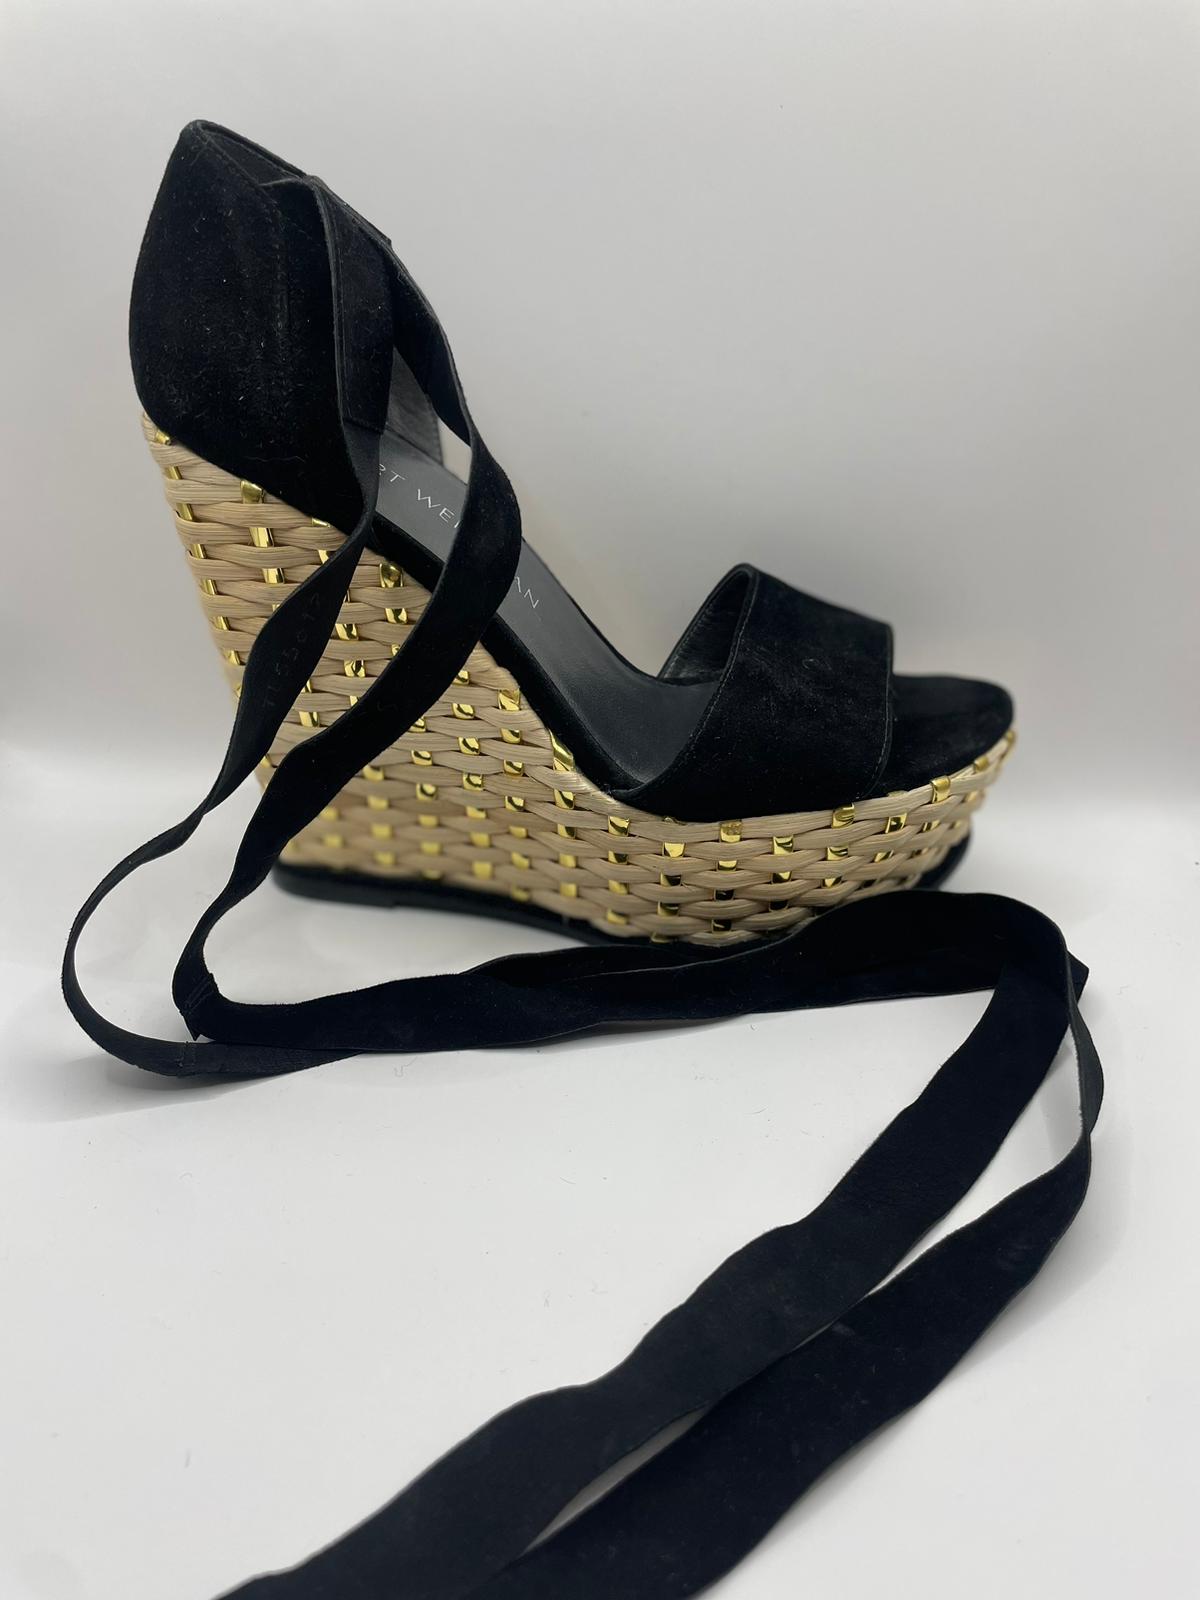 Stuart Weitzman black suede wedges with ankle ties size 38